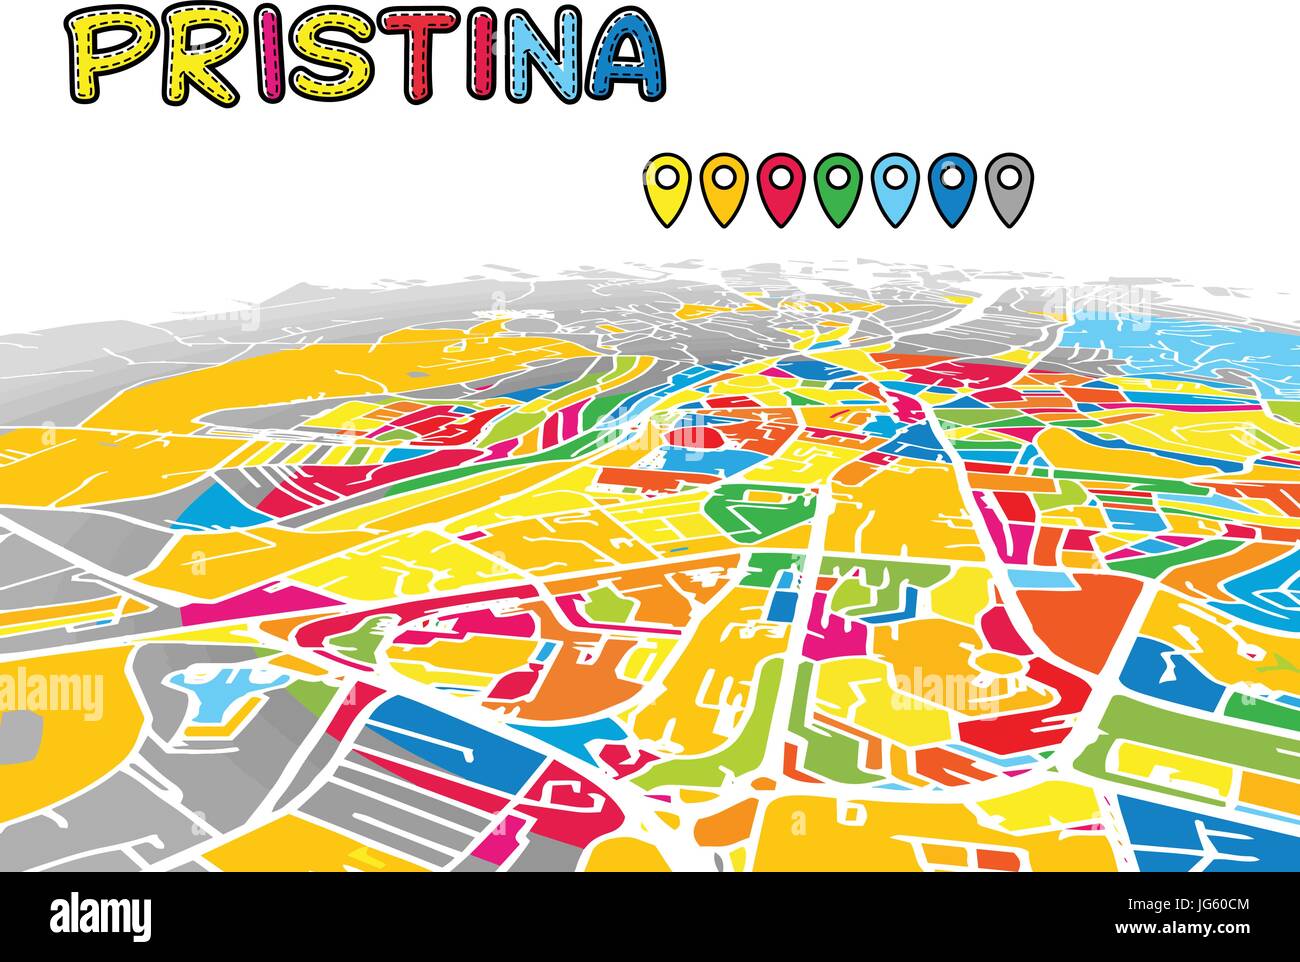 Pristina, Kosovo, Downtown 3D Vector Map of Famous Streets. Bright foreground full of colors. White Streets, Waterways and grey background areal. Whit Stock Vector